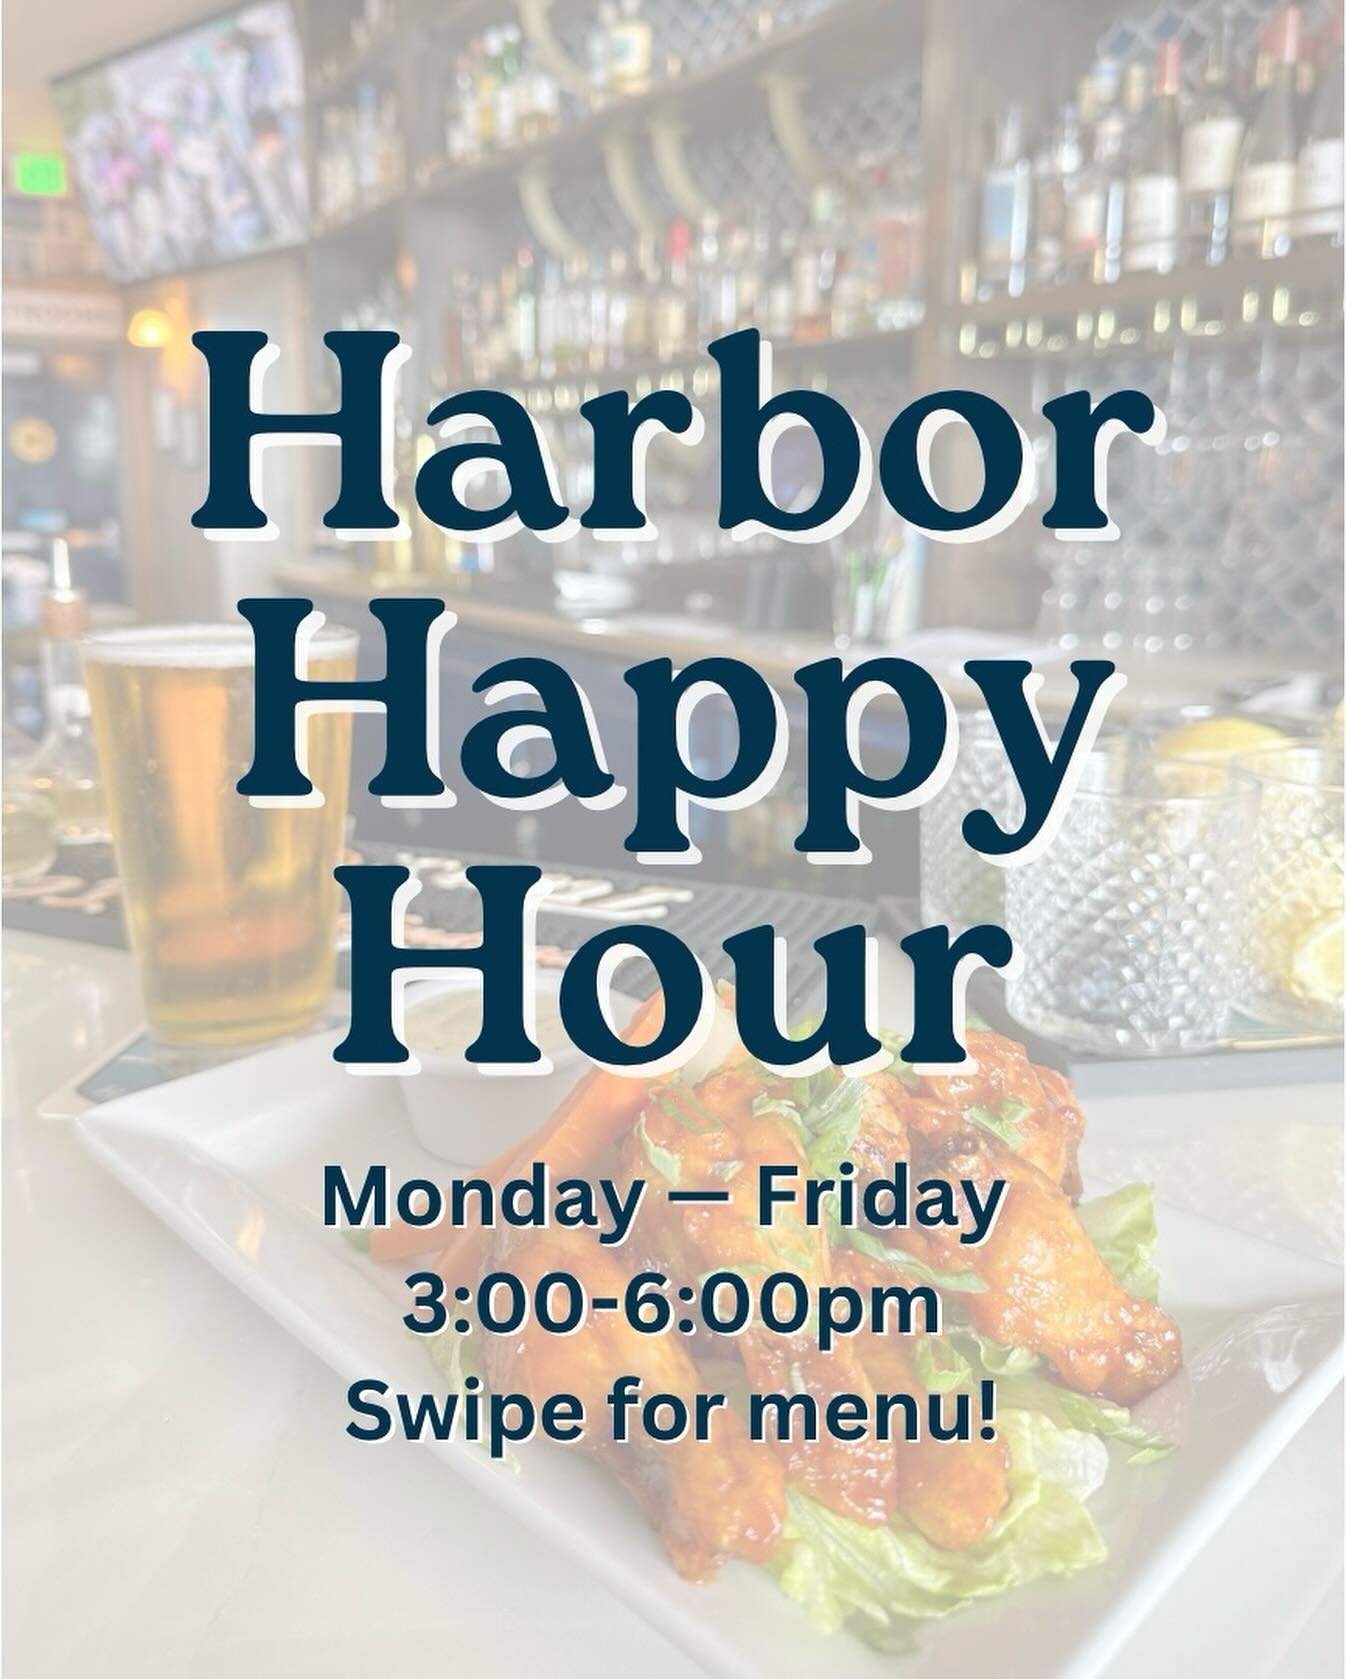 Starting tomorrow&hellip; Join us for Harbor Happy Hour at Ketch! 🍻⚓️

Monday &mdash; Friday 3:00-6:00pm

Cheers, Coastside!!!